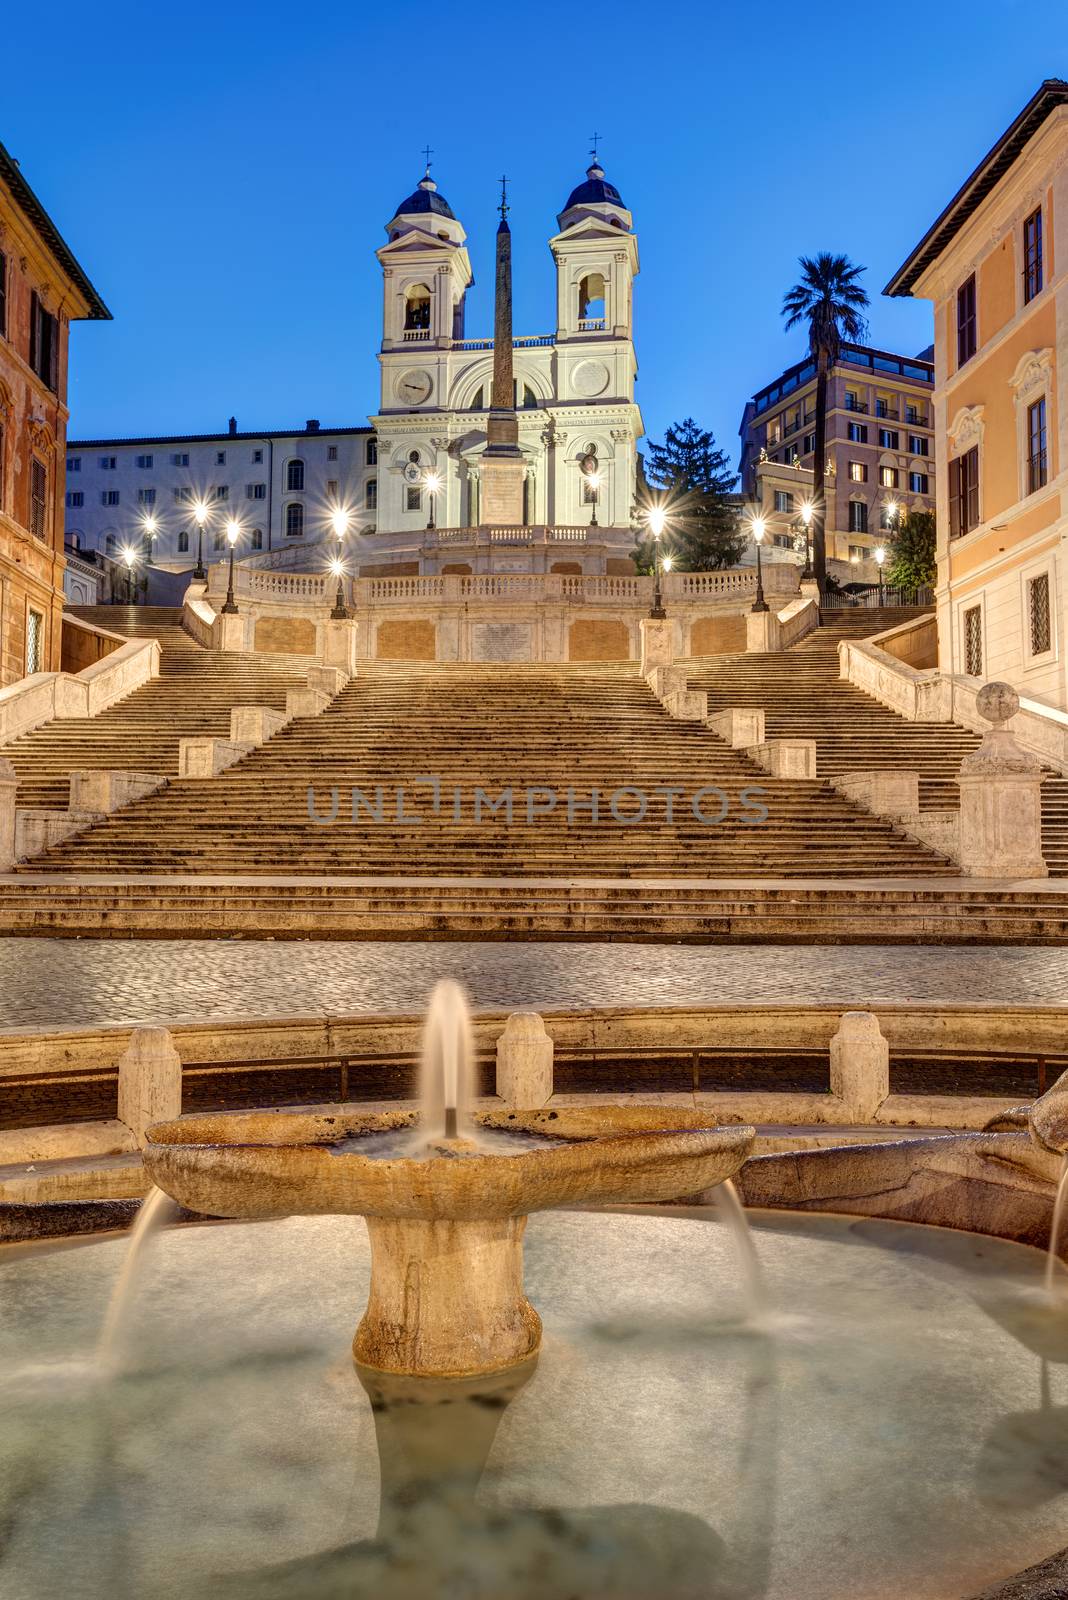 The famous Spanish Steps with a fountain in Rome at dawn